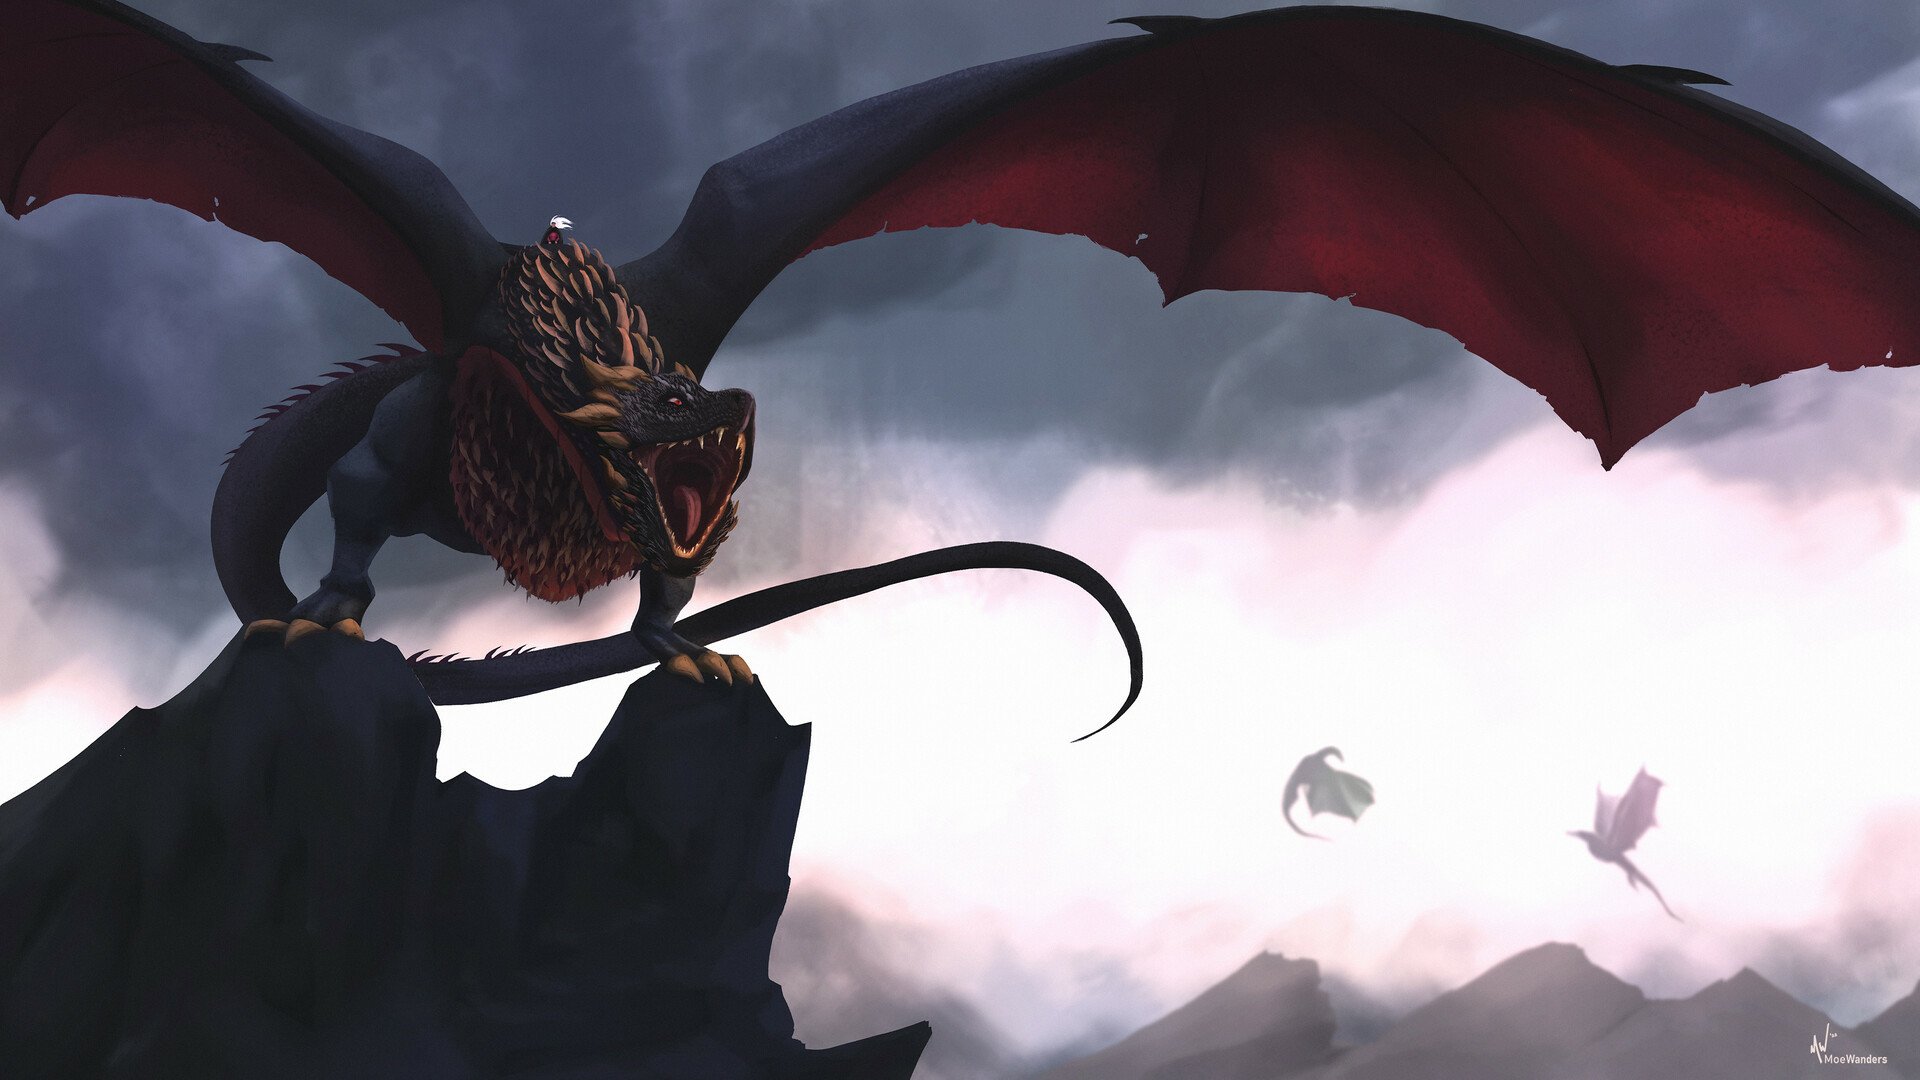 Aegon the Conqueror & Balerion the Dread by Moe Wanders